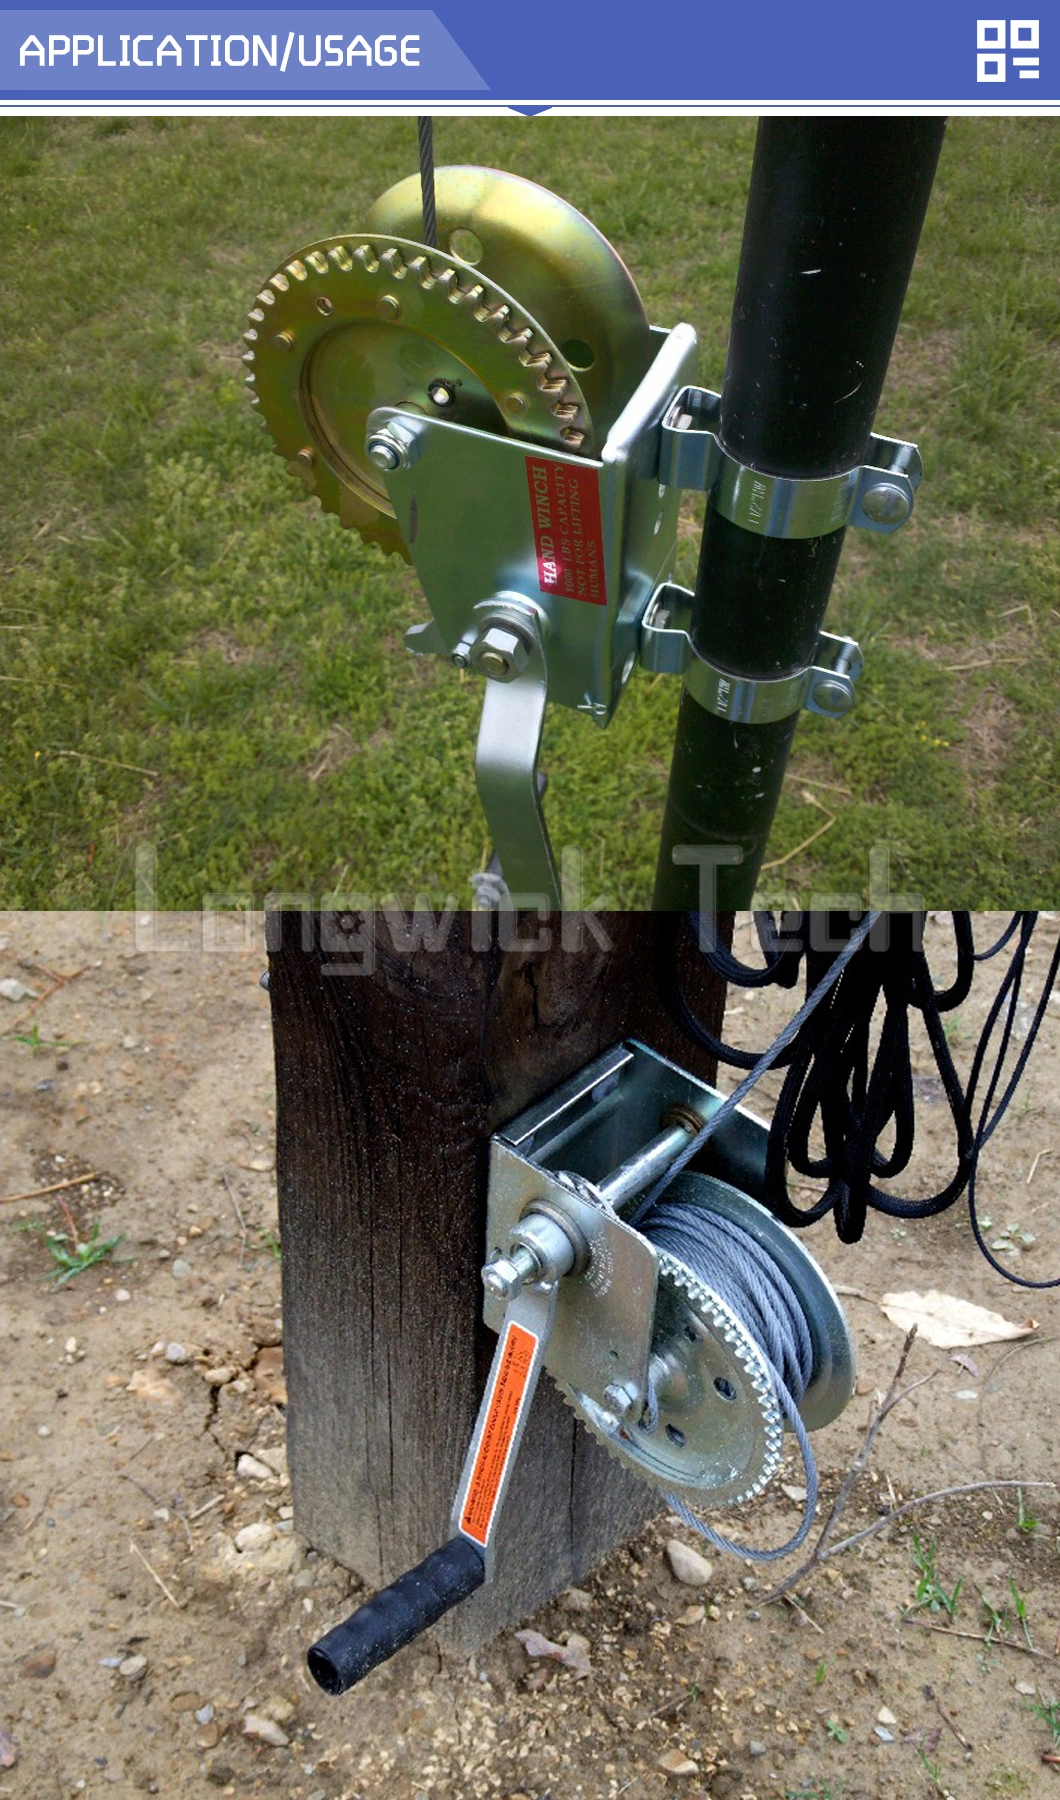 Heavy Duty Trailer Hand Manual Lifting Hoist Strap Ce Approved Winch